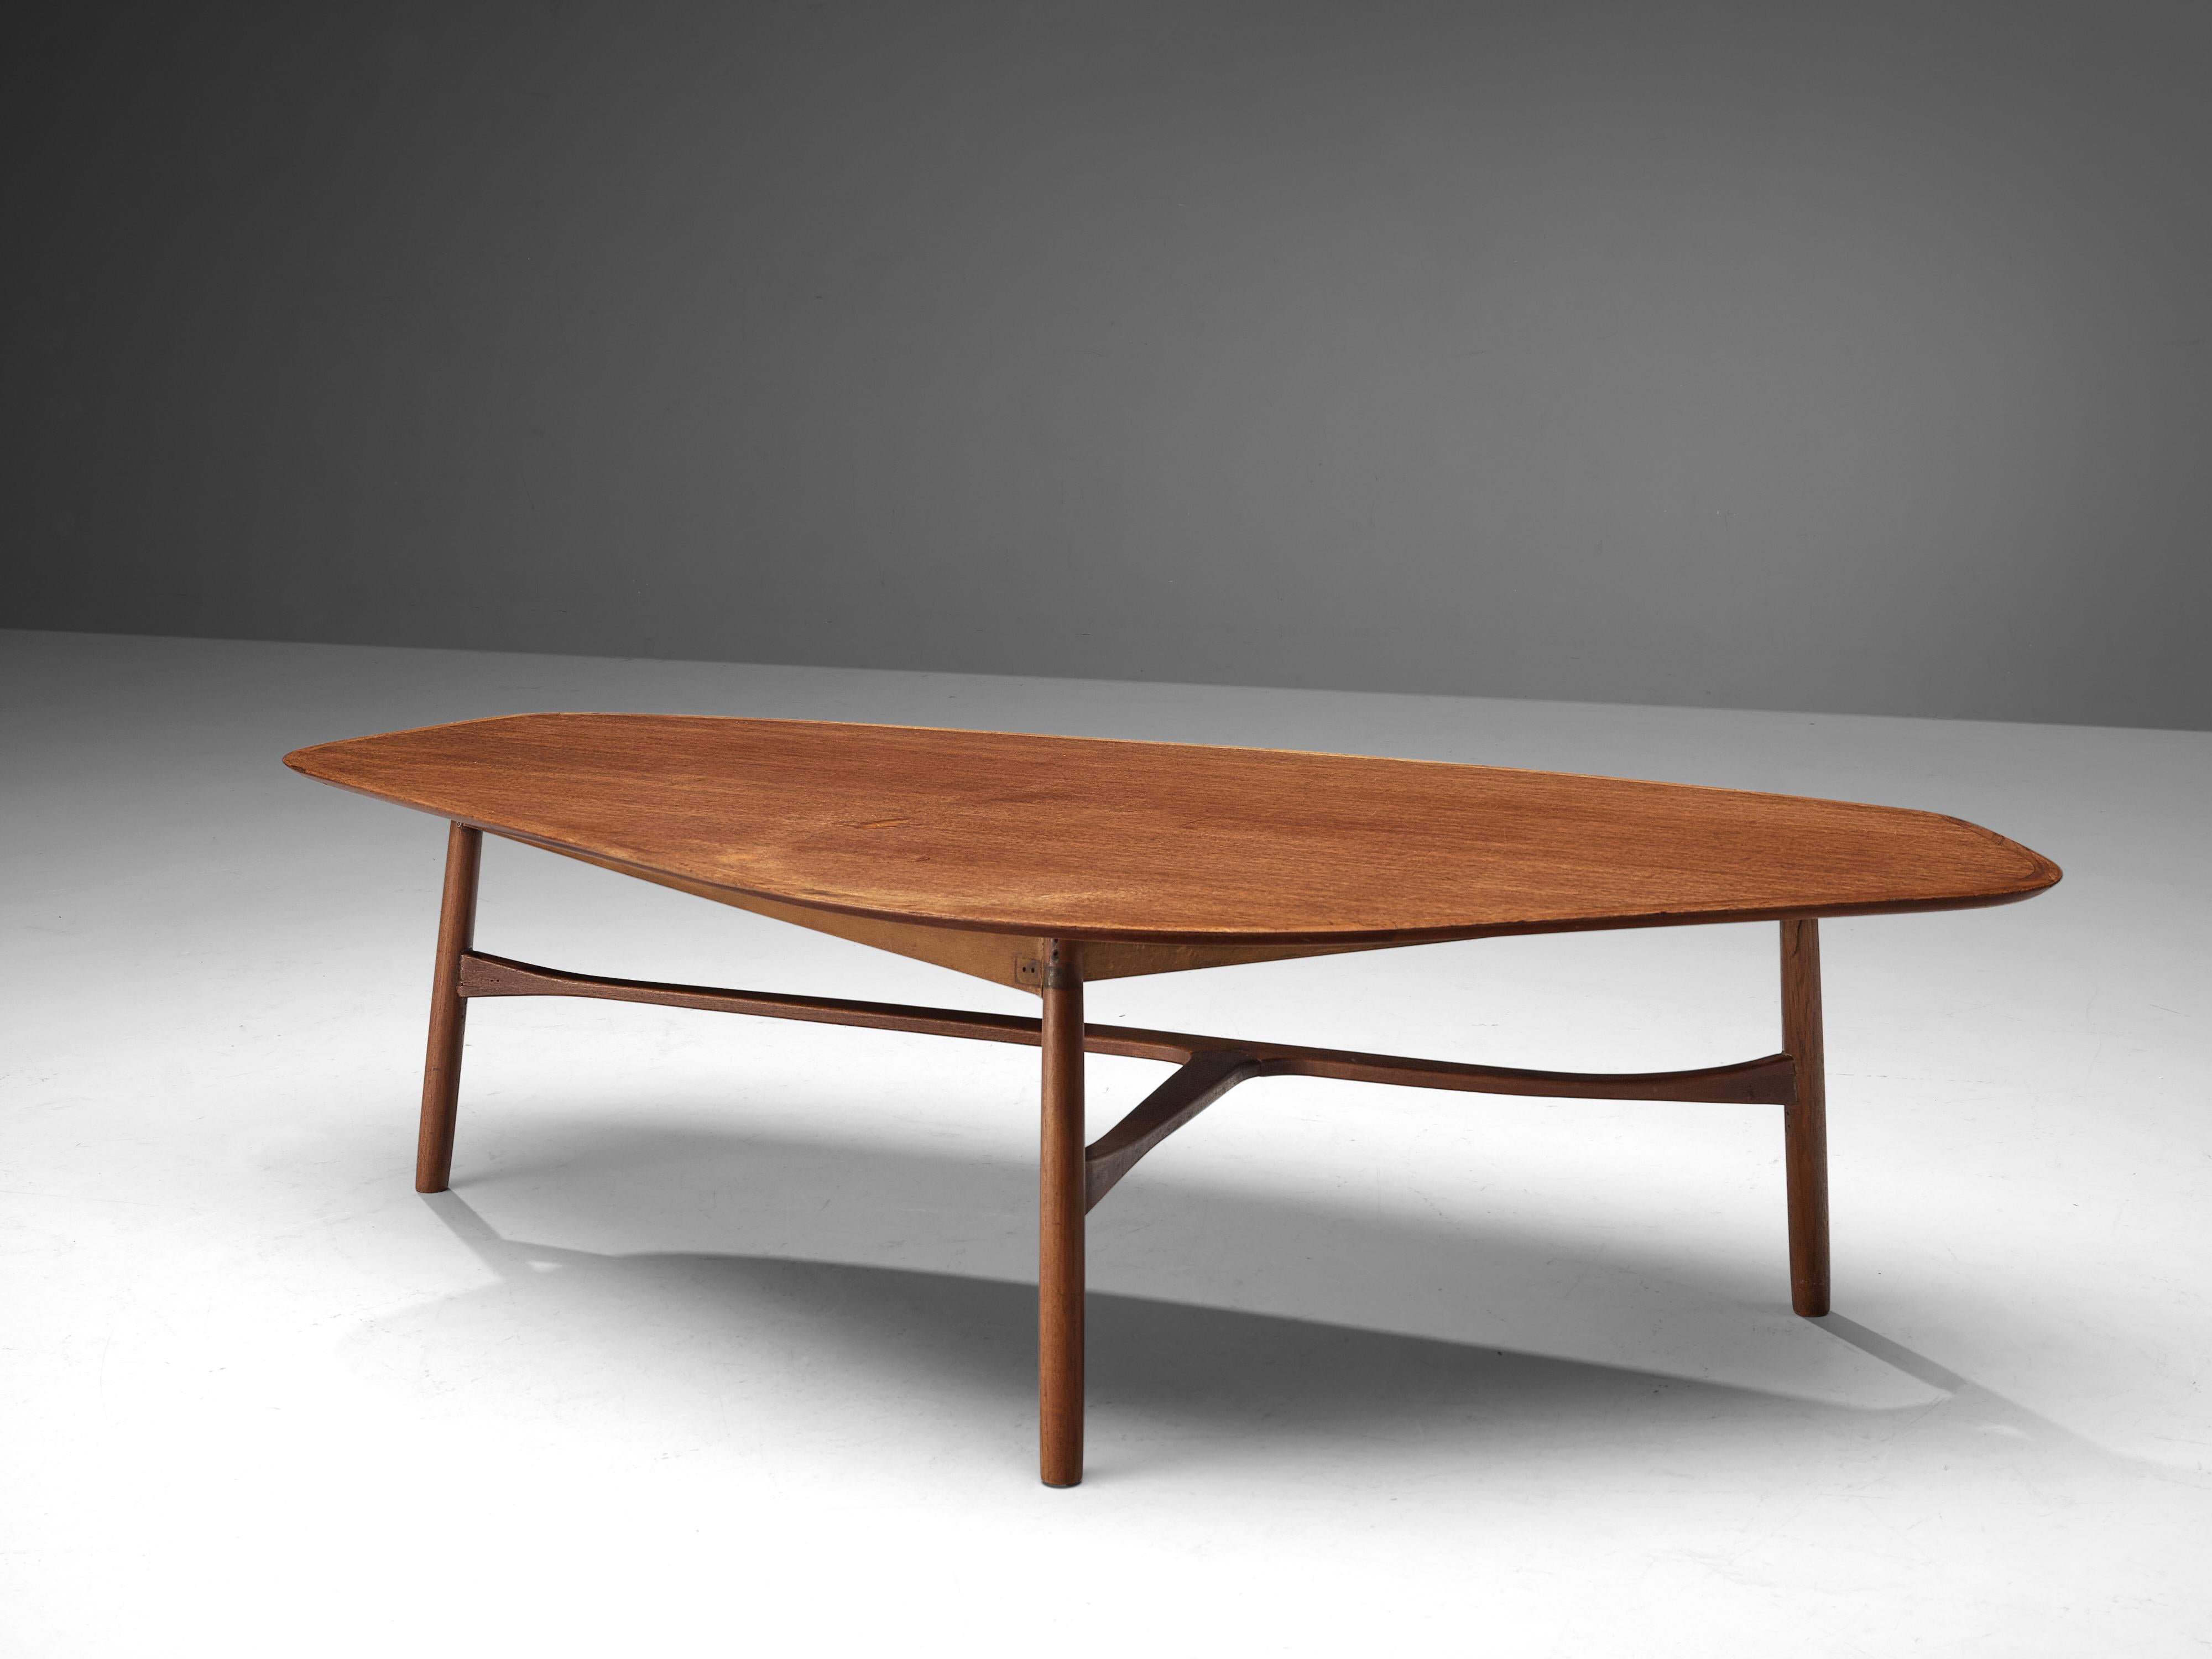 Svante Skogh, coffee table, teak, Sweden, 1950s

This freely shaped coffee table with three thin tapered legs is part is beautifully shaped and shows high attention to detail, especially by means of the connecting tripod slat between the legs.